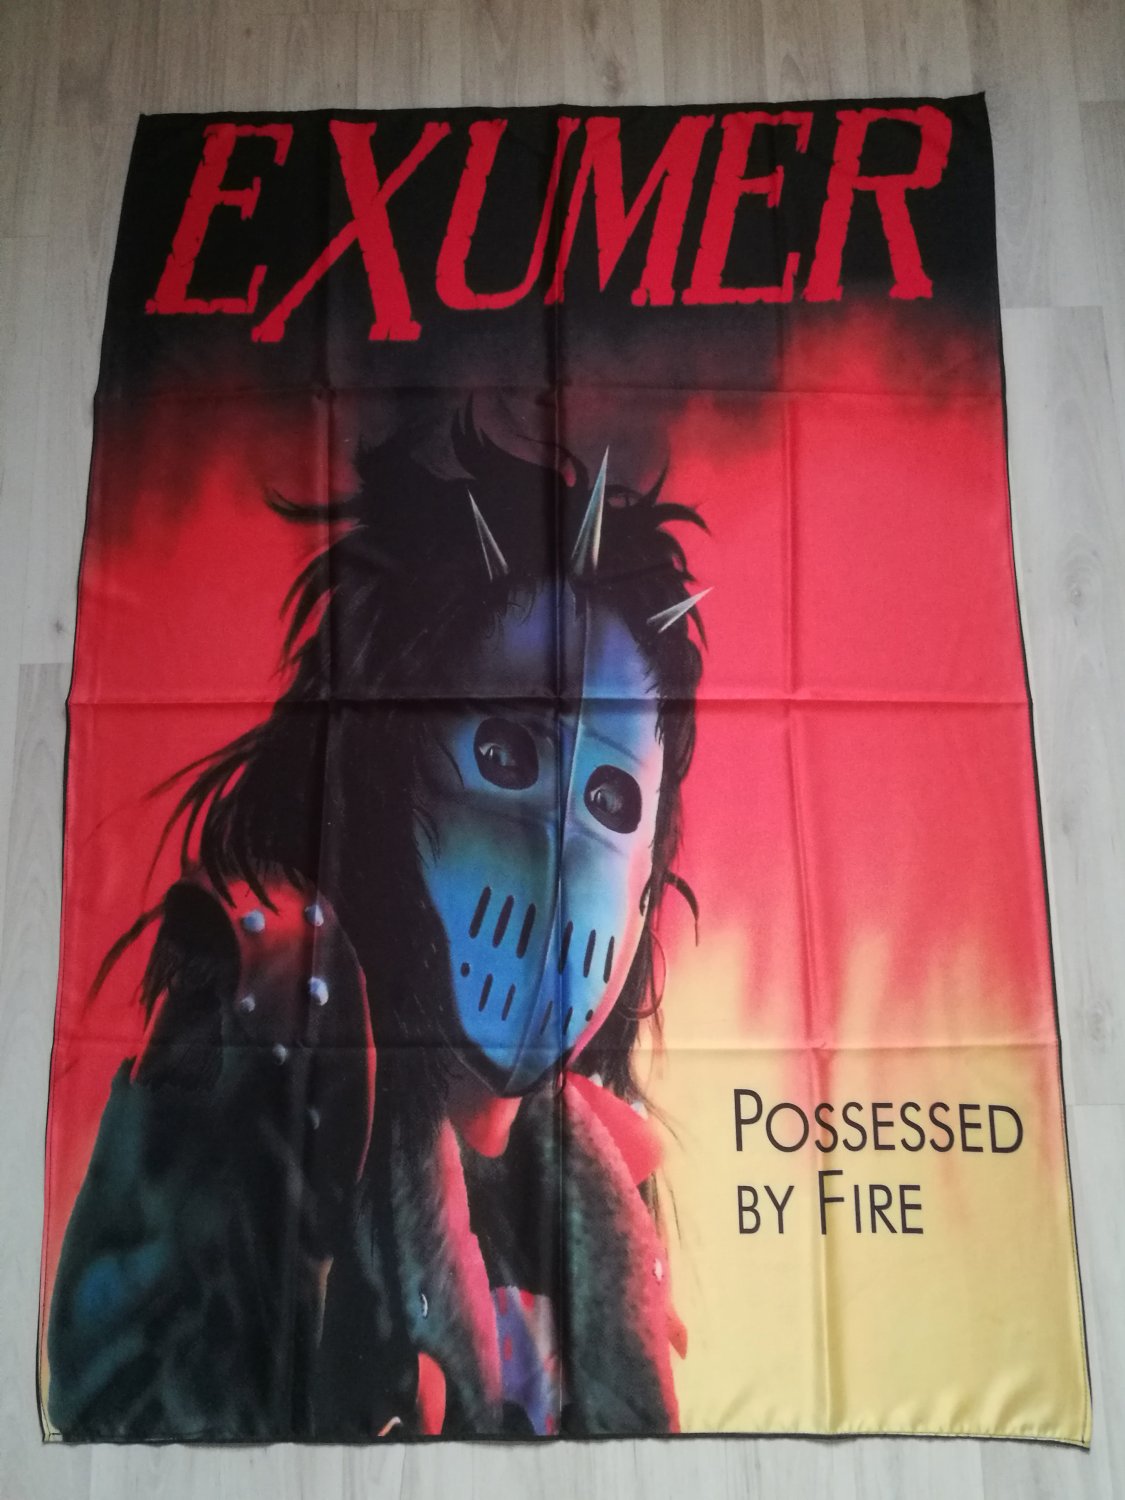 EXUMER - Possessed by fire FLAG Heavy death metal cloth poster